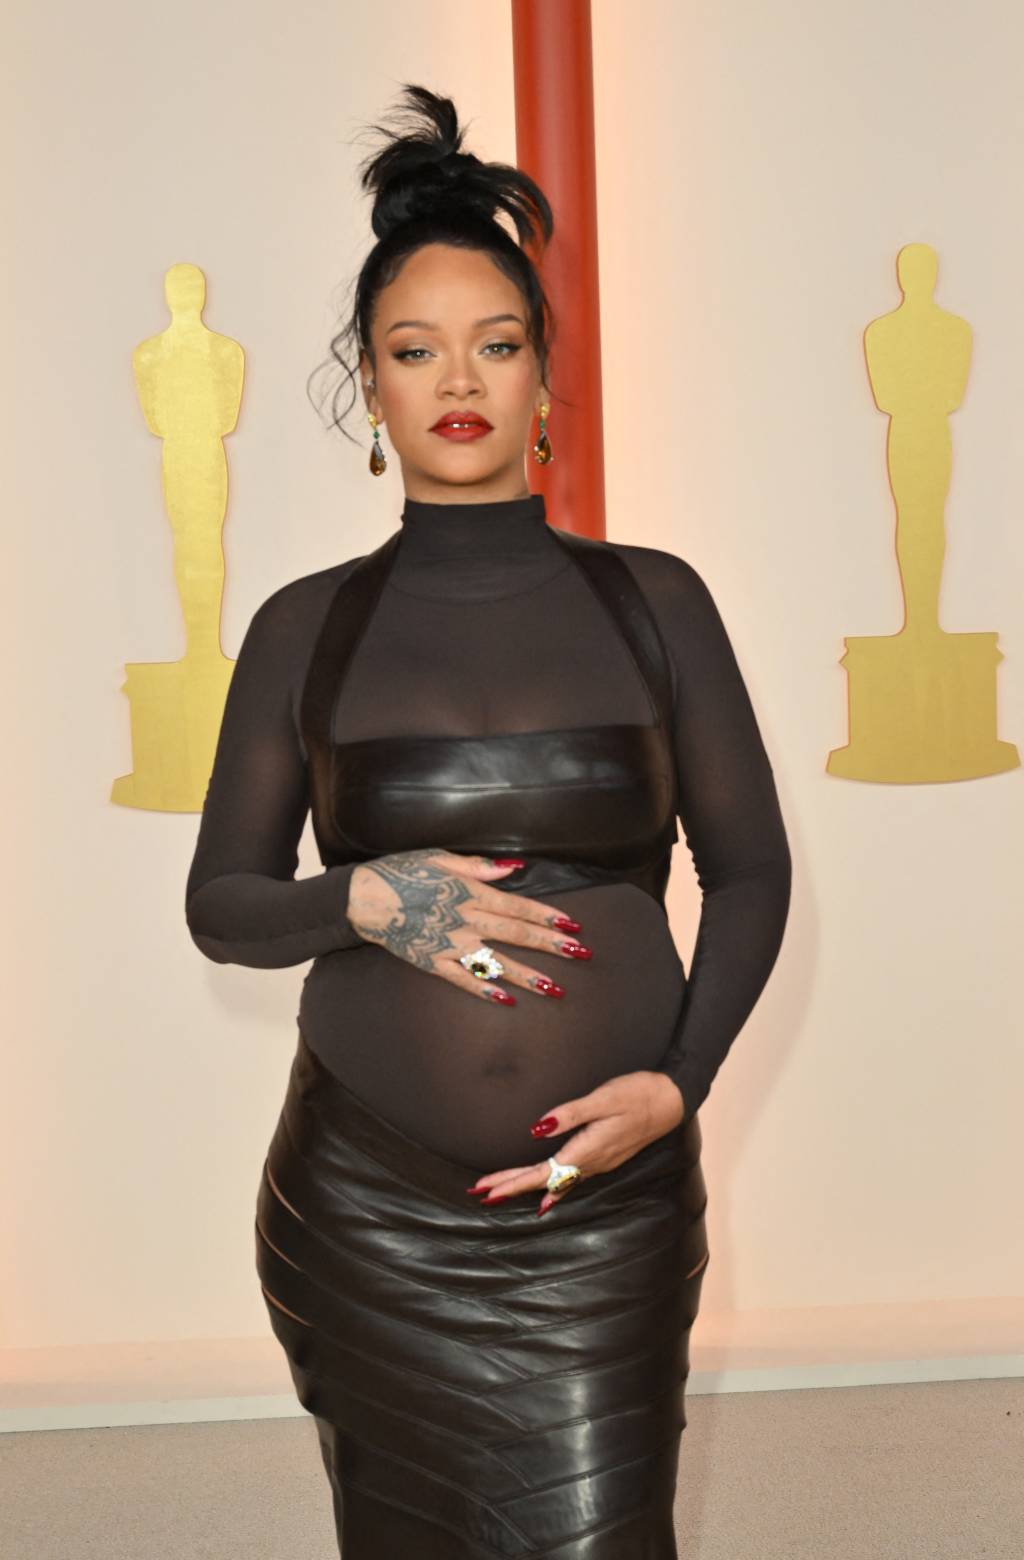 Barbadian singer-songwriter, actress Rihanna attends the 95th Annual Academy Awards at the Dolby Theatre in Hollywood, California on March 12, 2023. (Photo by ANGELA WEISS / AFP)